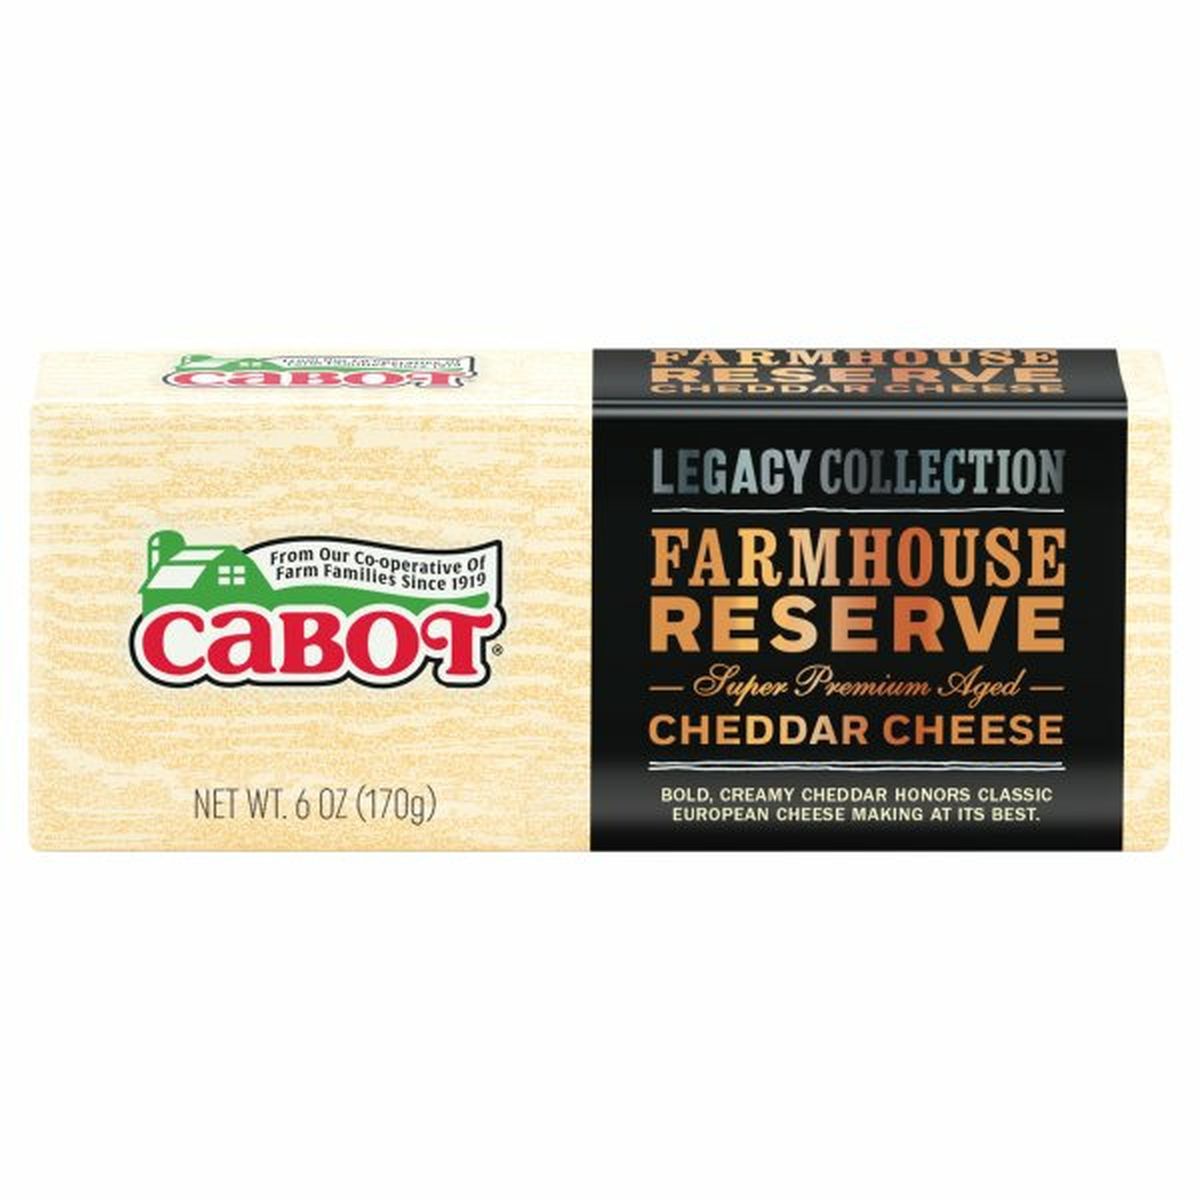 Calories in Cabot Cheddar Cheese, Farmhouse Reserve, Super Premium Aged